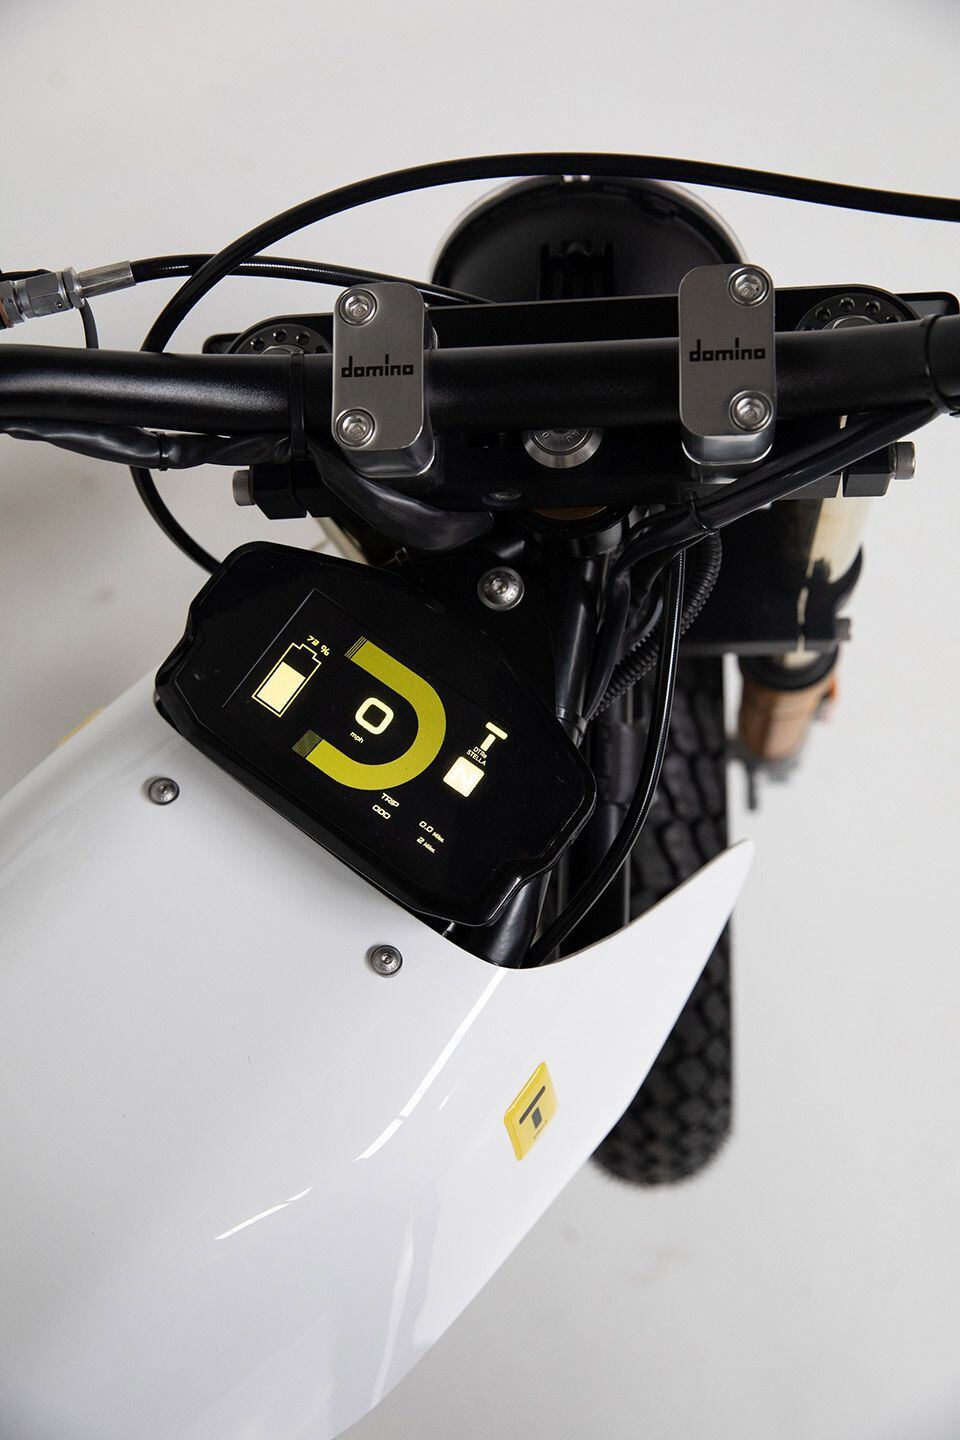 A cockpit view of the DTRe Stella, with a color dash displaying bike functions and battery status.